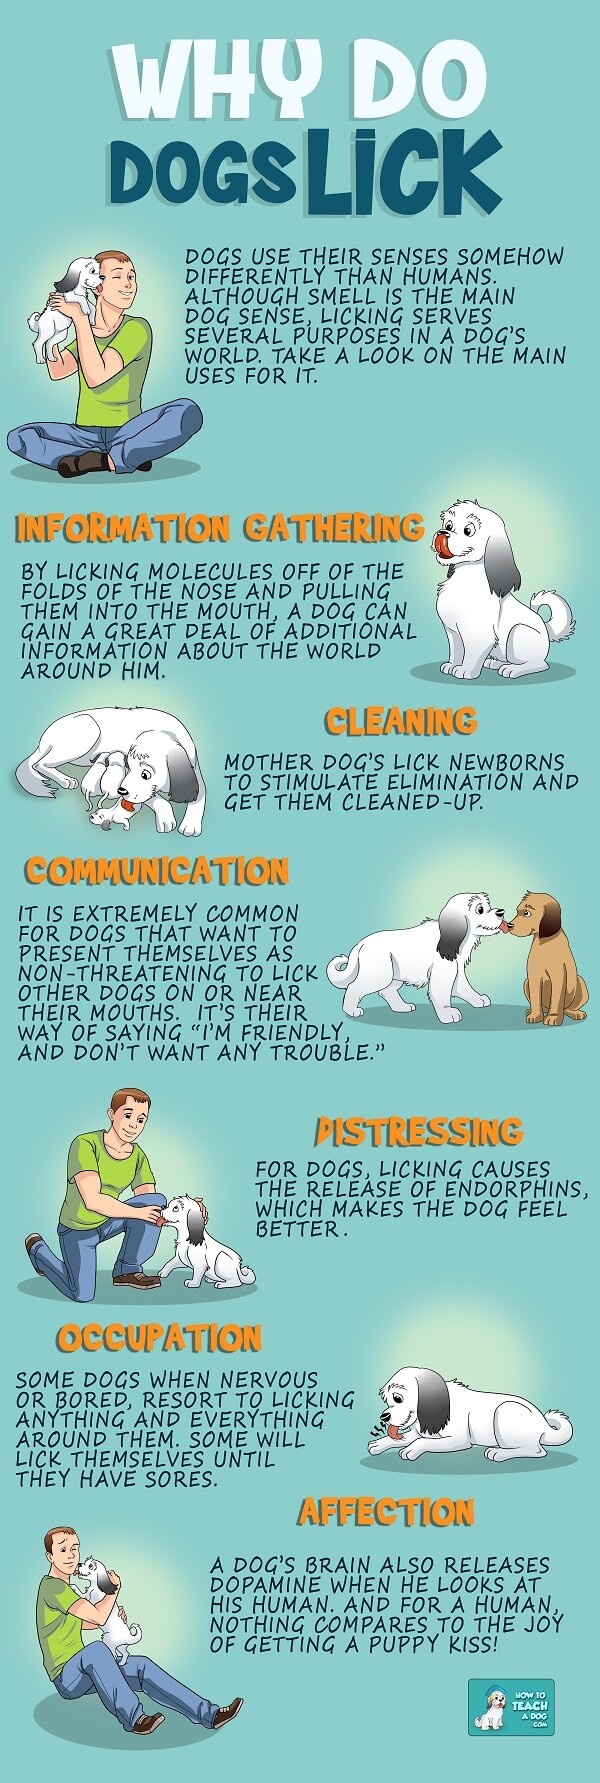 Why do dogs lick - infographic